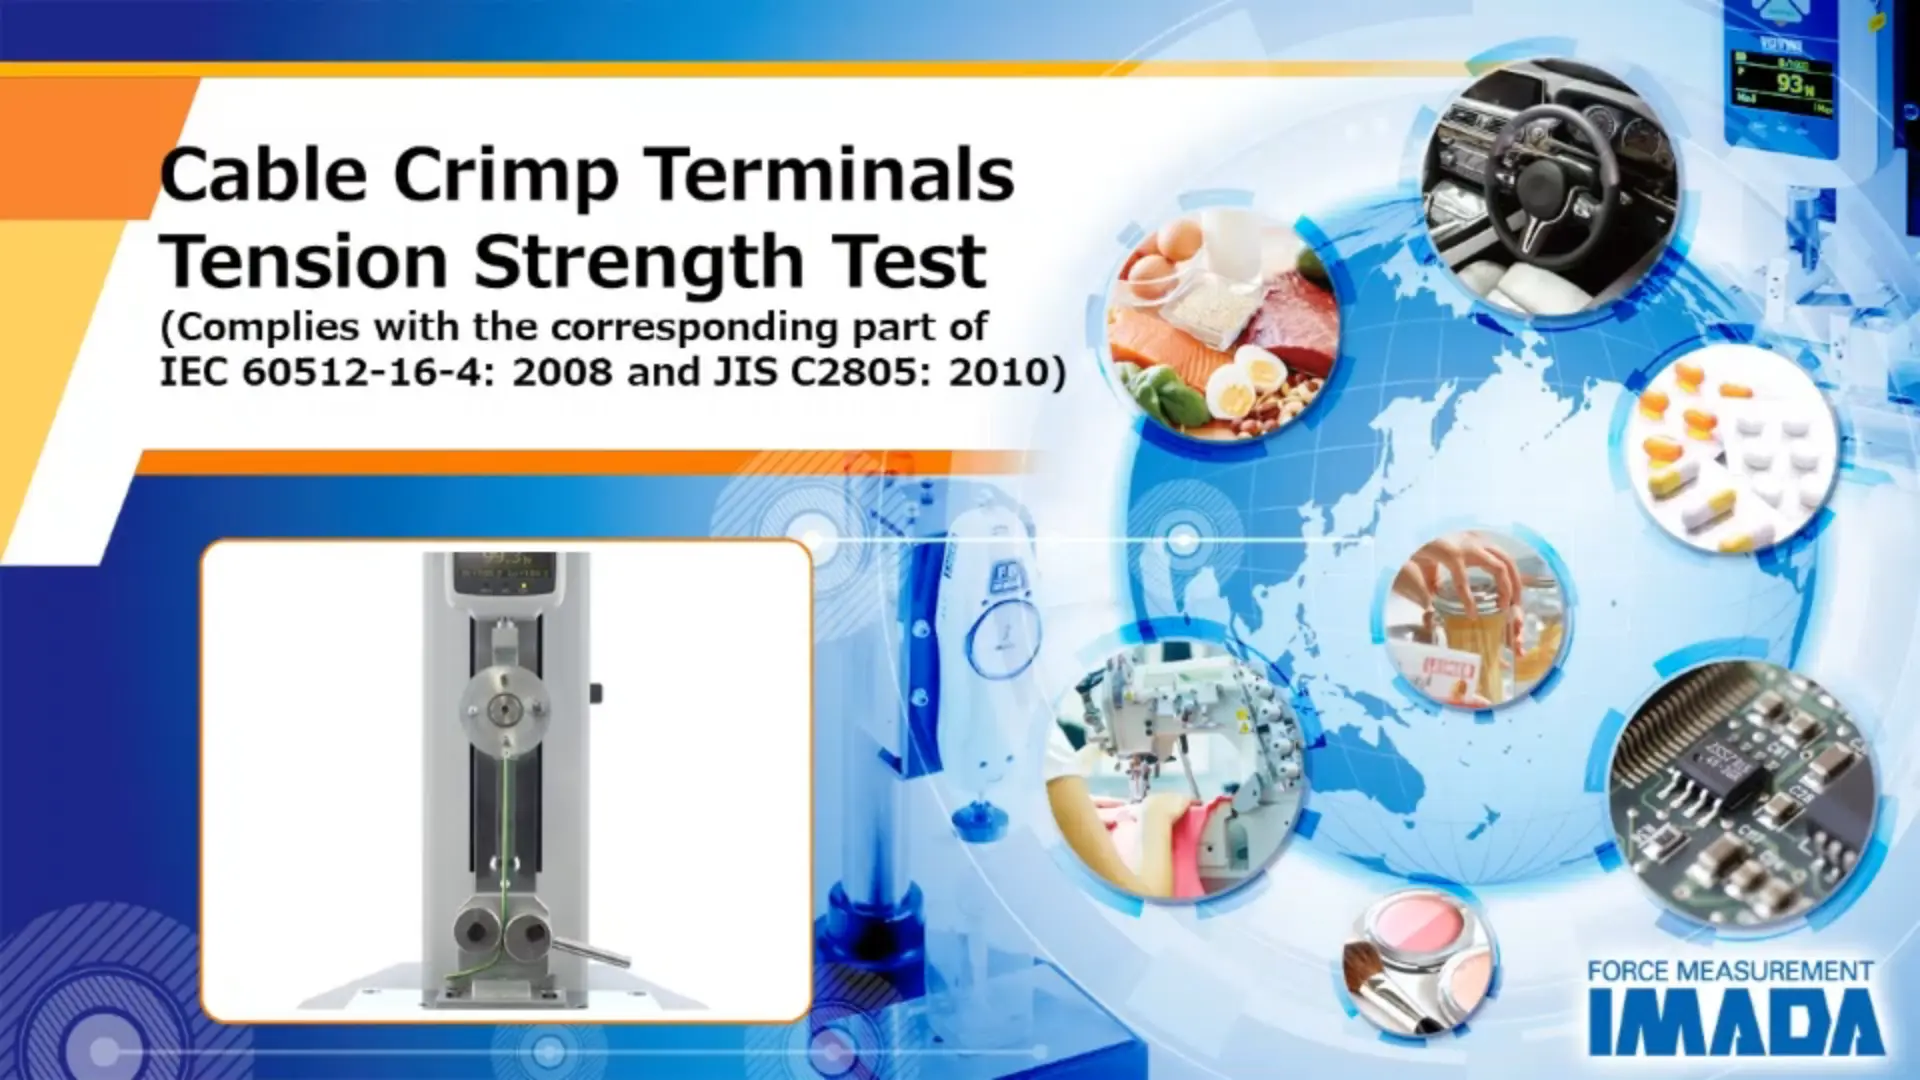 Cable Crimp Terminals Tension Strength Test (Complies with the corresponding part of IEC 60512-16-4: 2008 and JIS C2805: 2010)